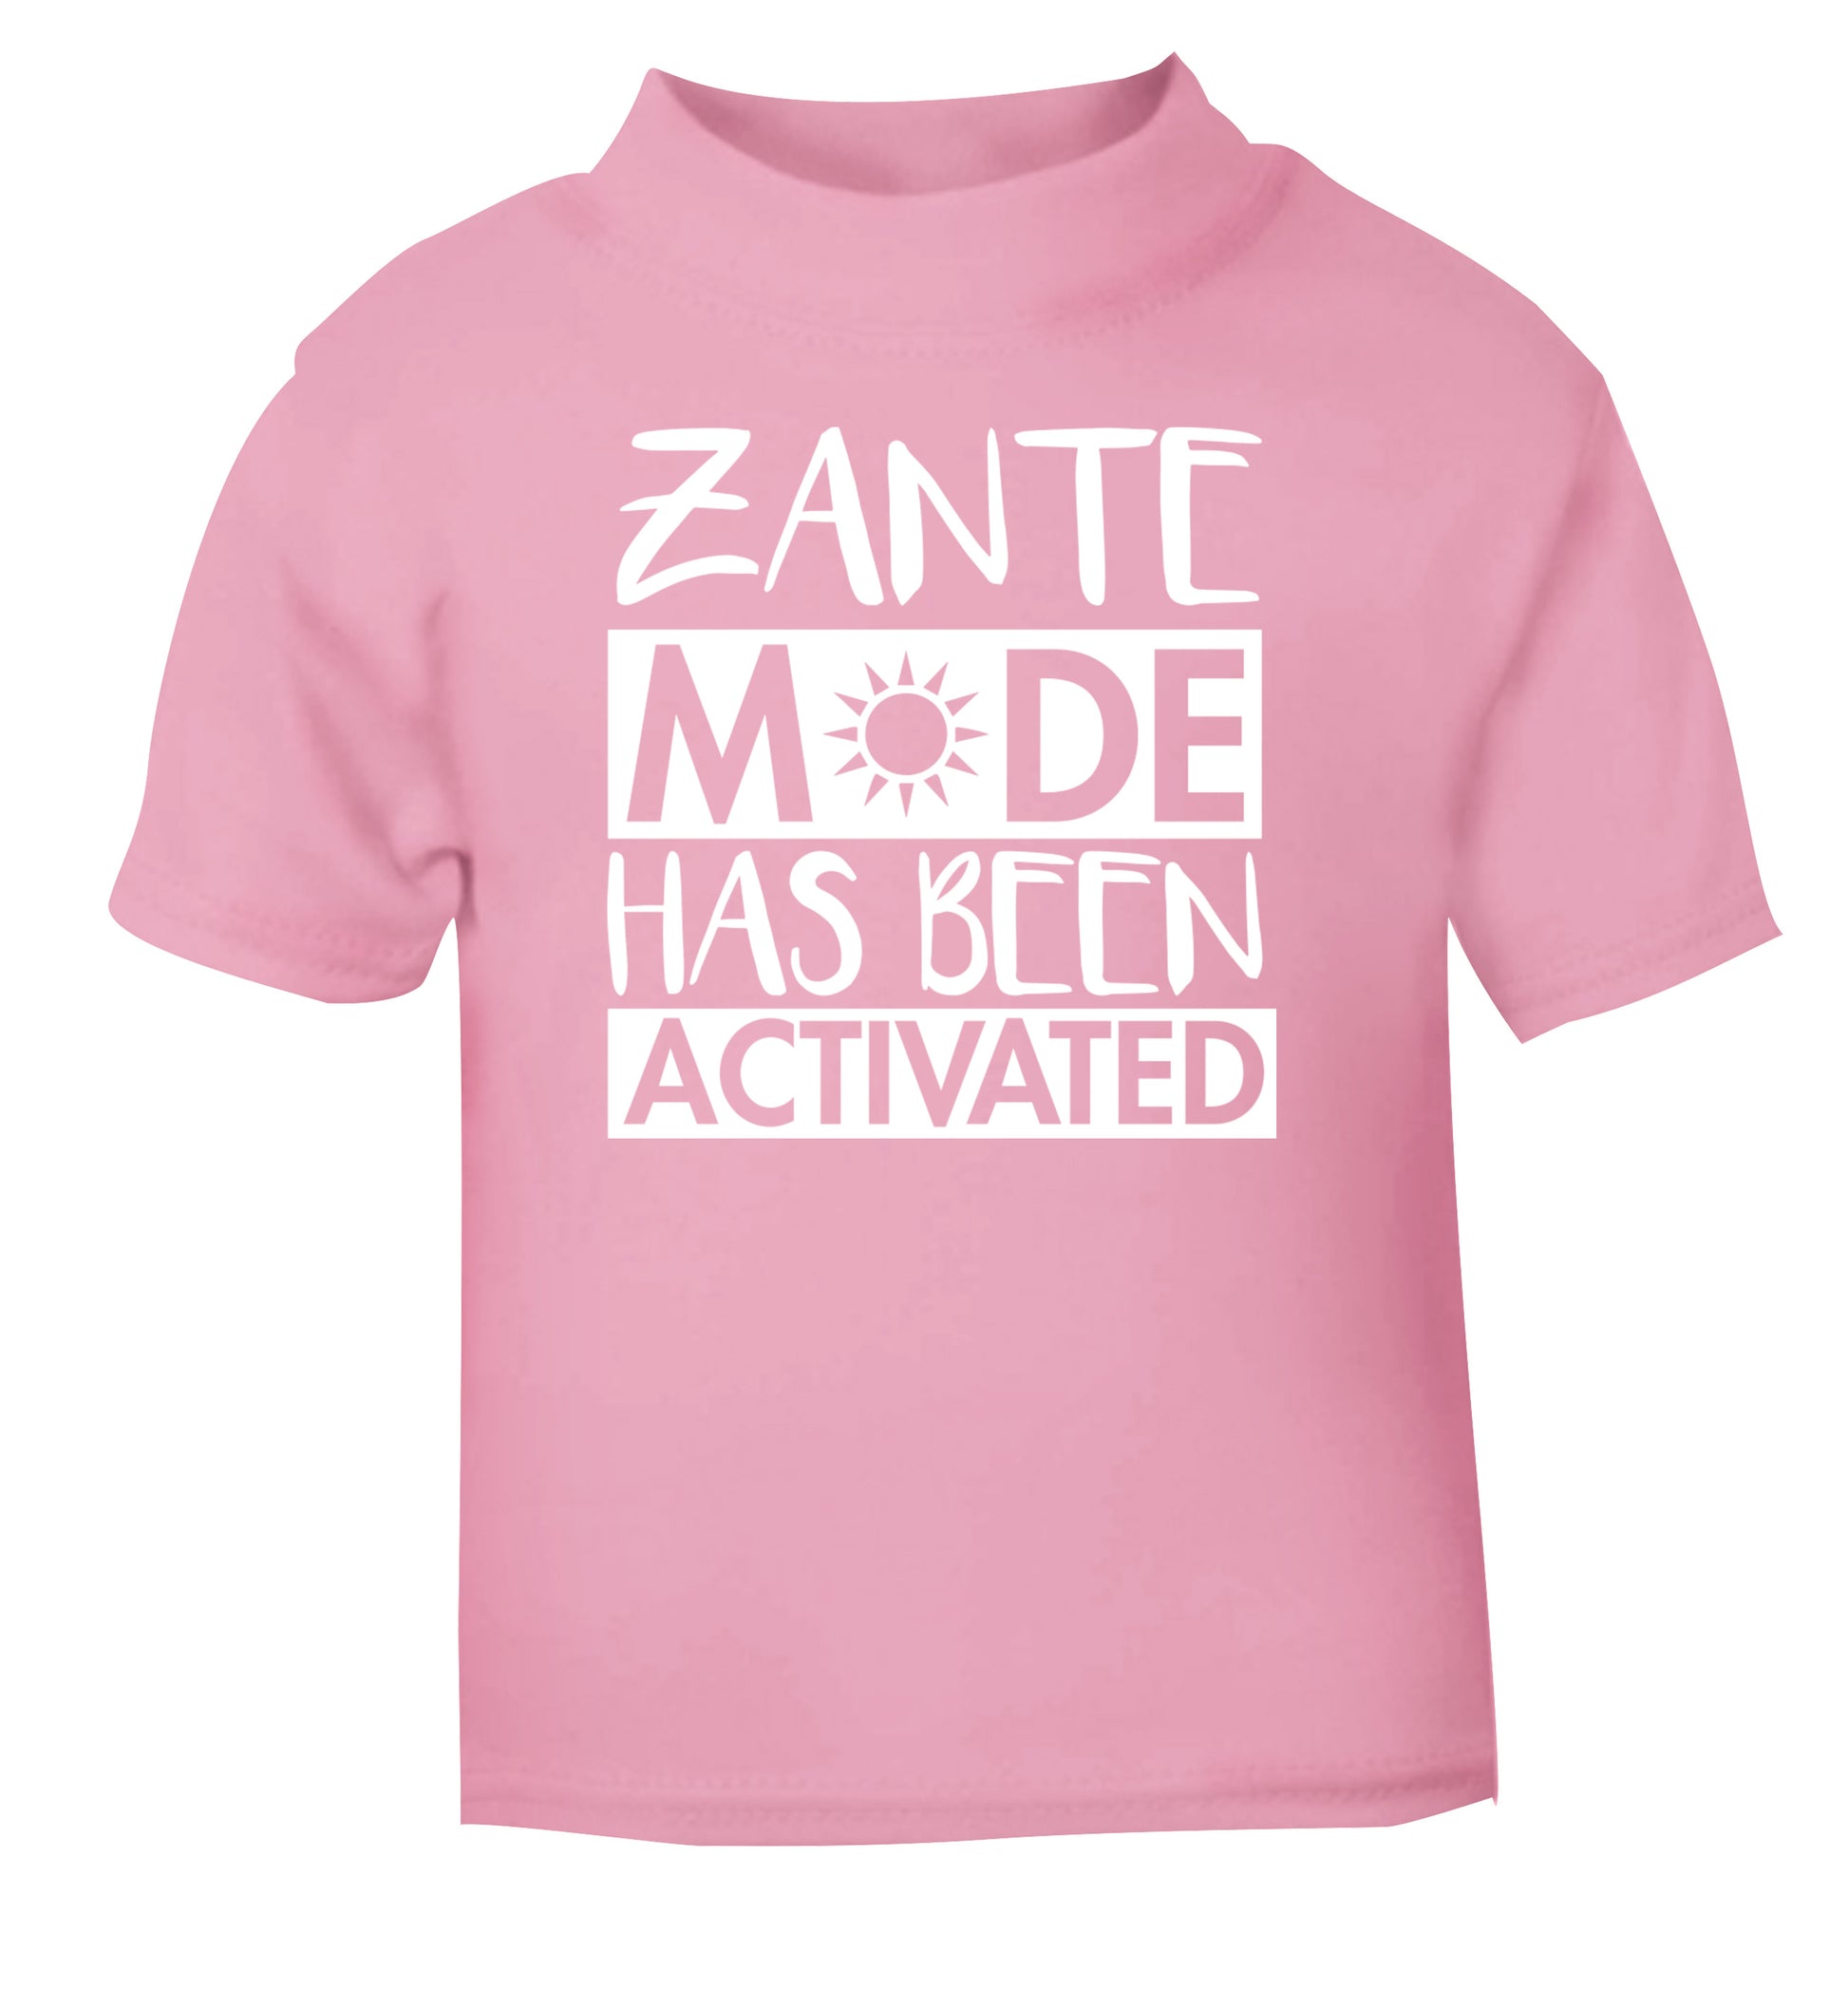 Zante mode has been activated light pink Baby Toddler Tshirt 2 Years